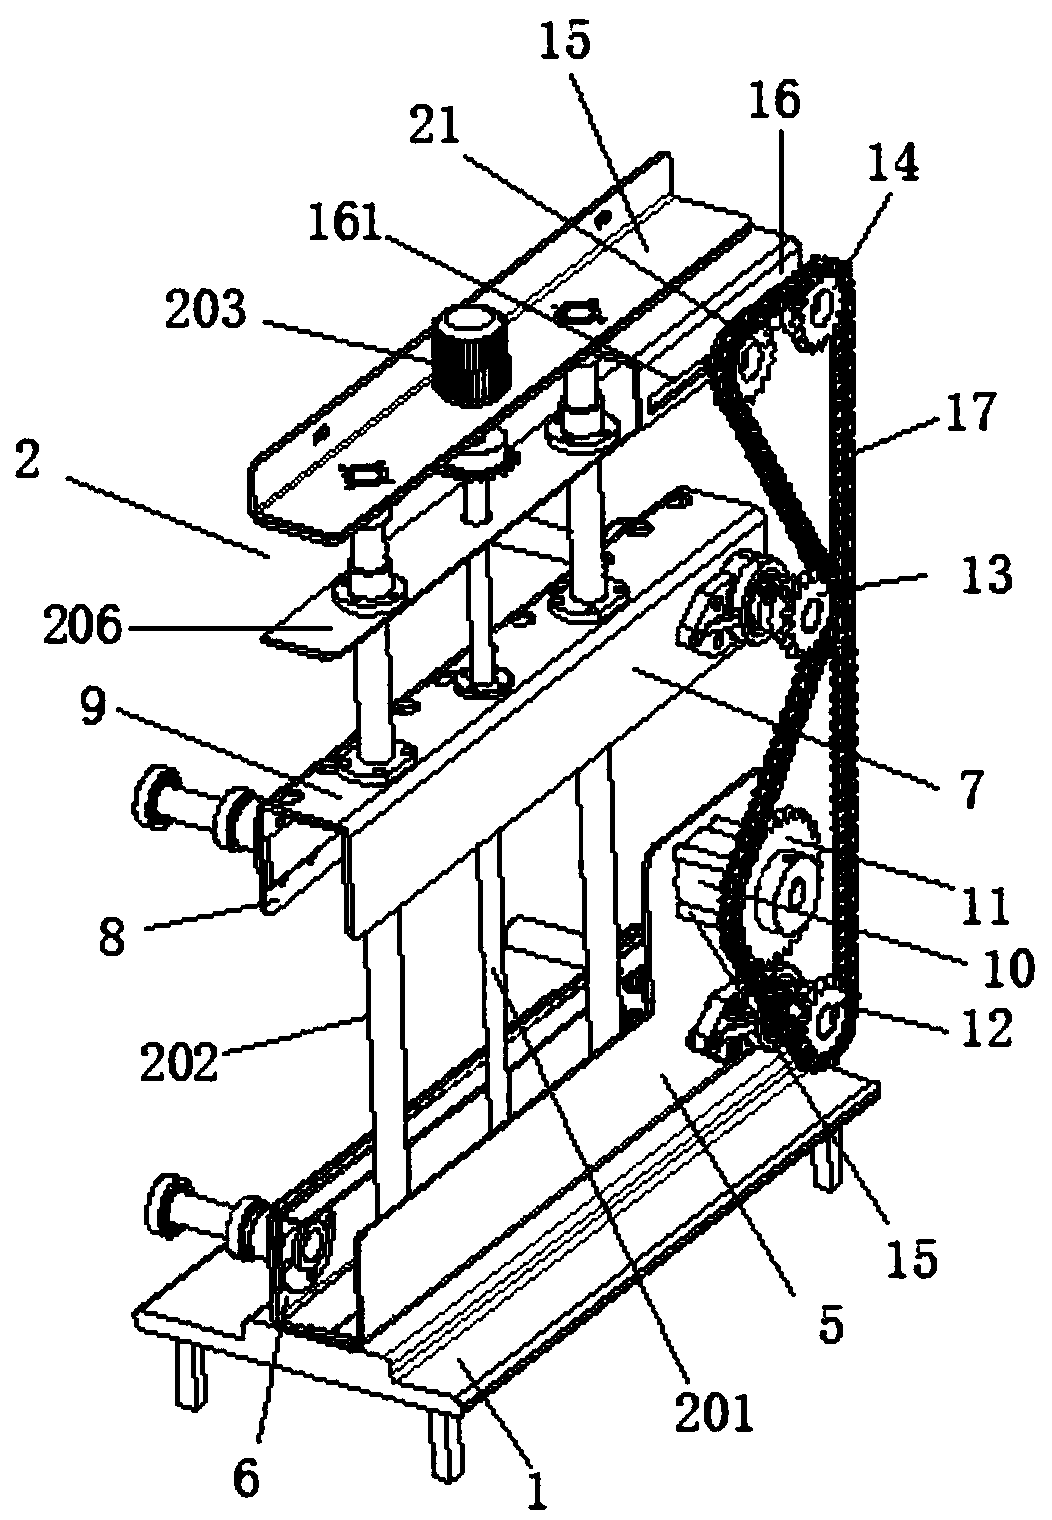 Liftable belt conveyor with double conveying belts for coal mining